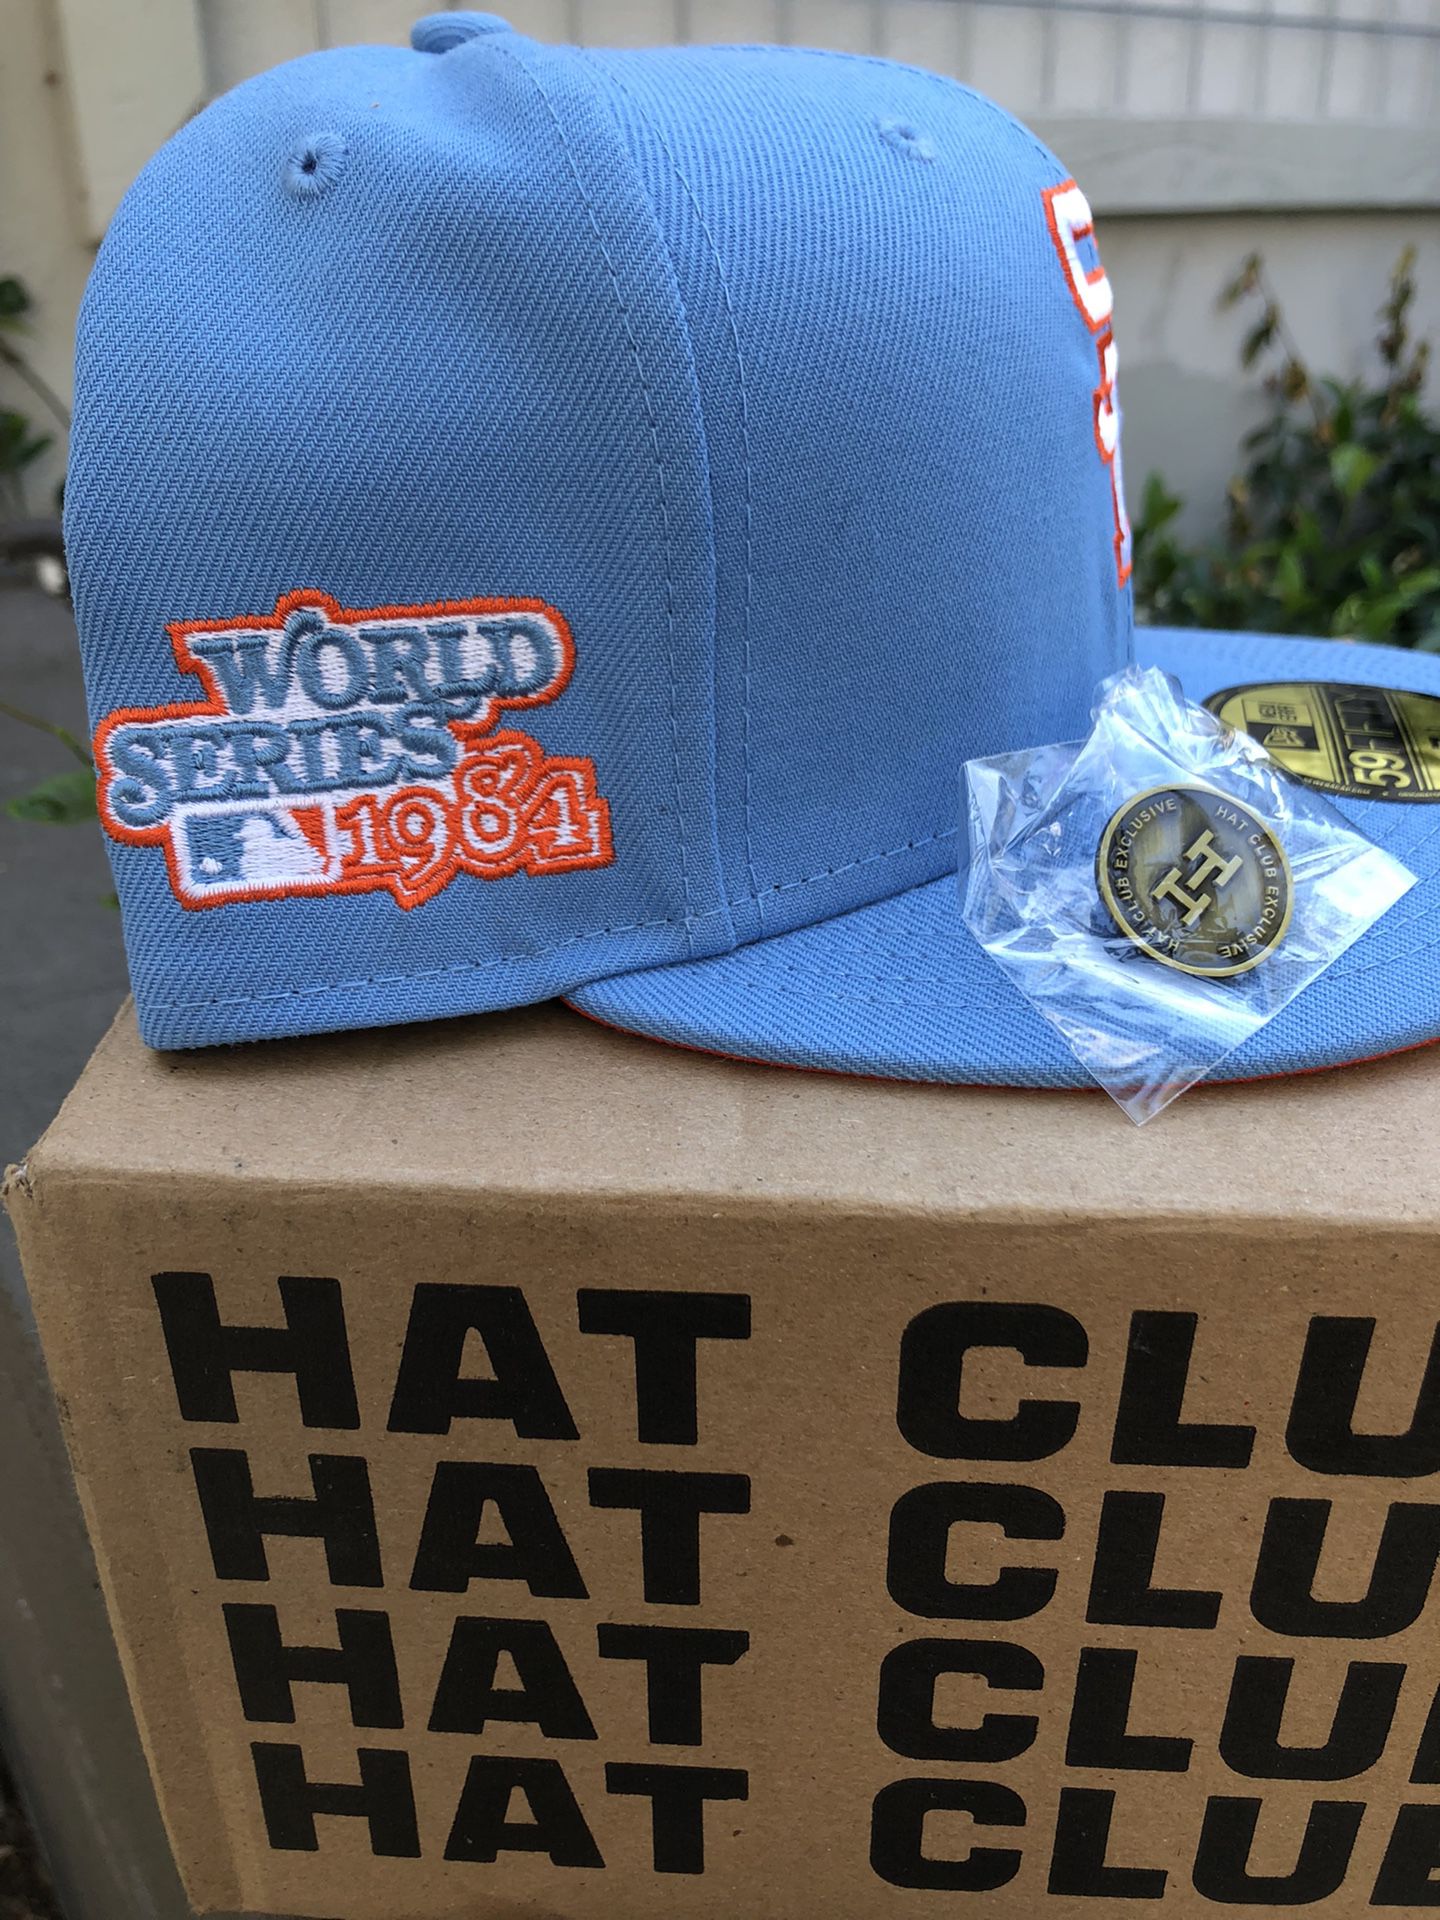 San Diego Padres City Connect Hat for Sale in San Diego, CA - OfferUp